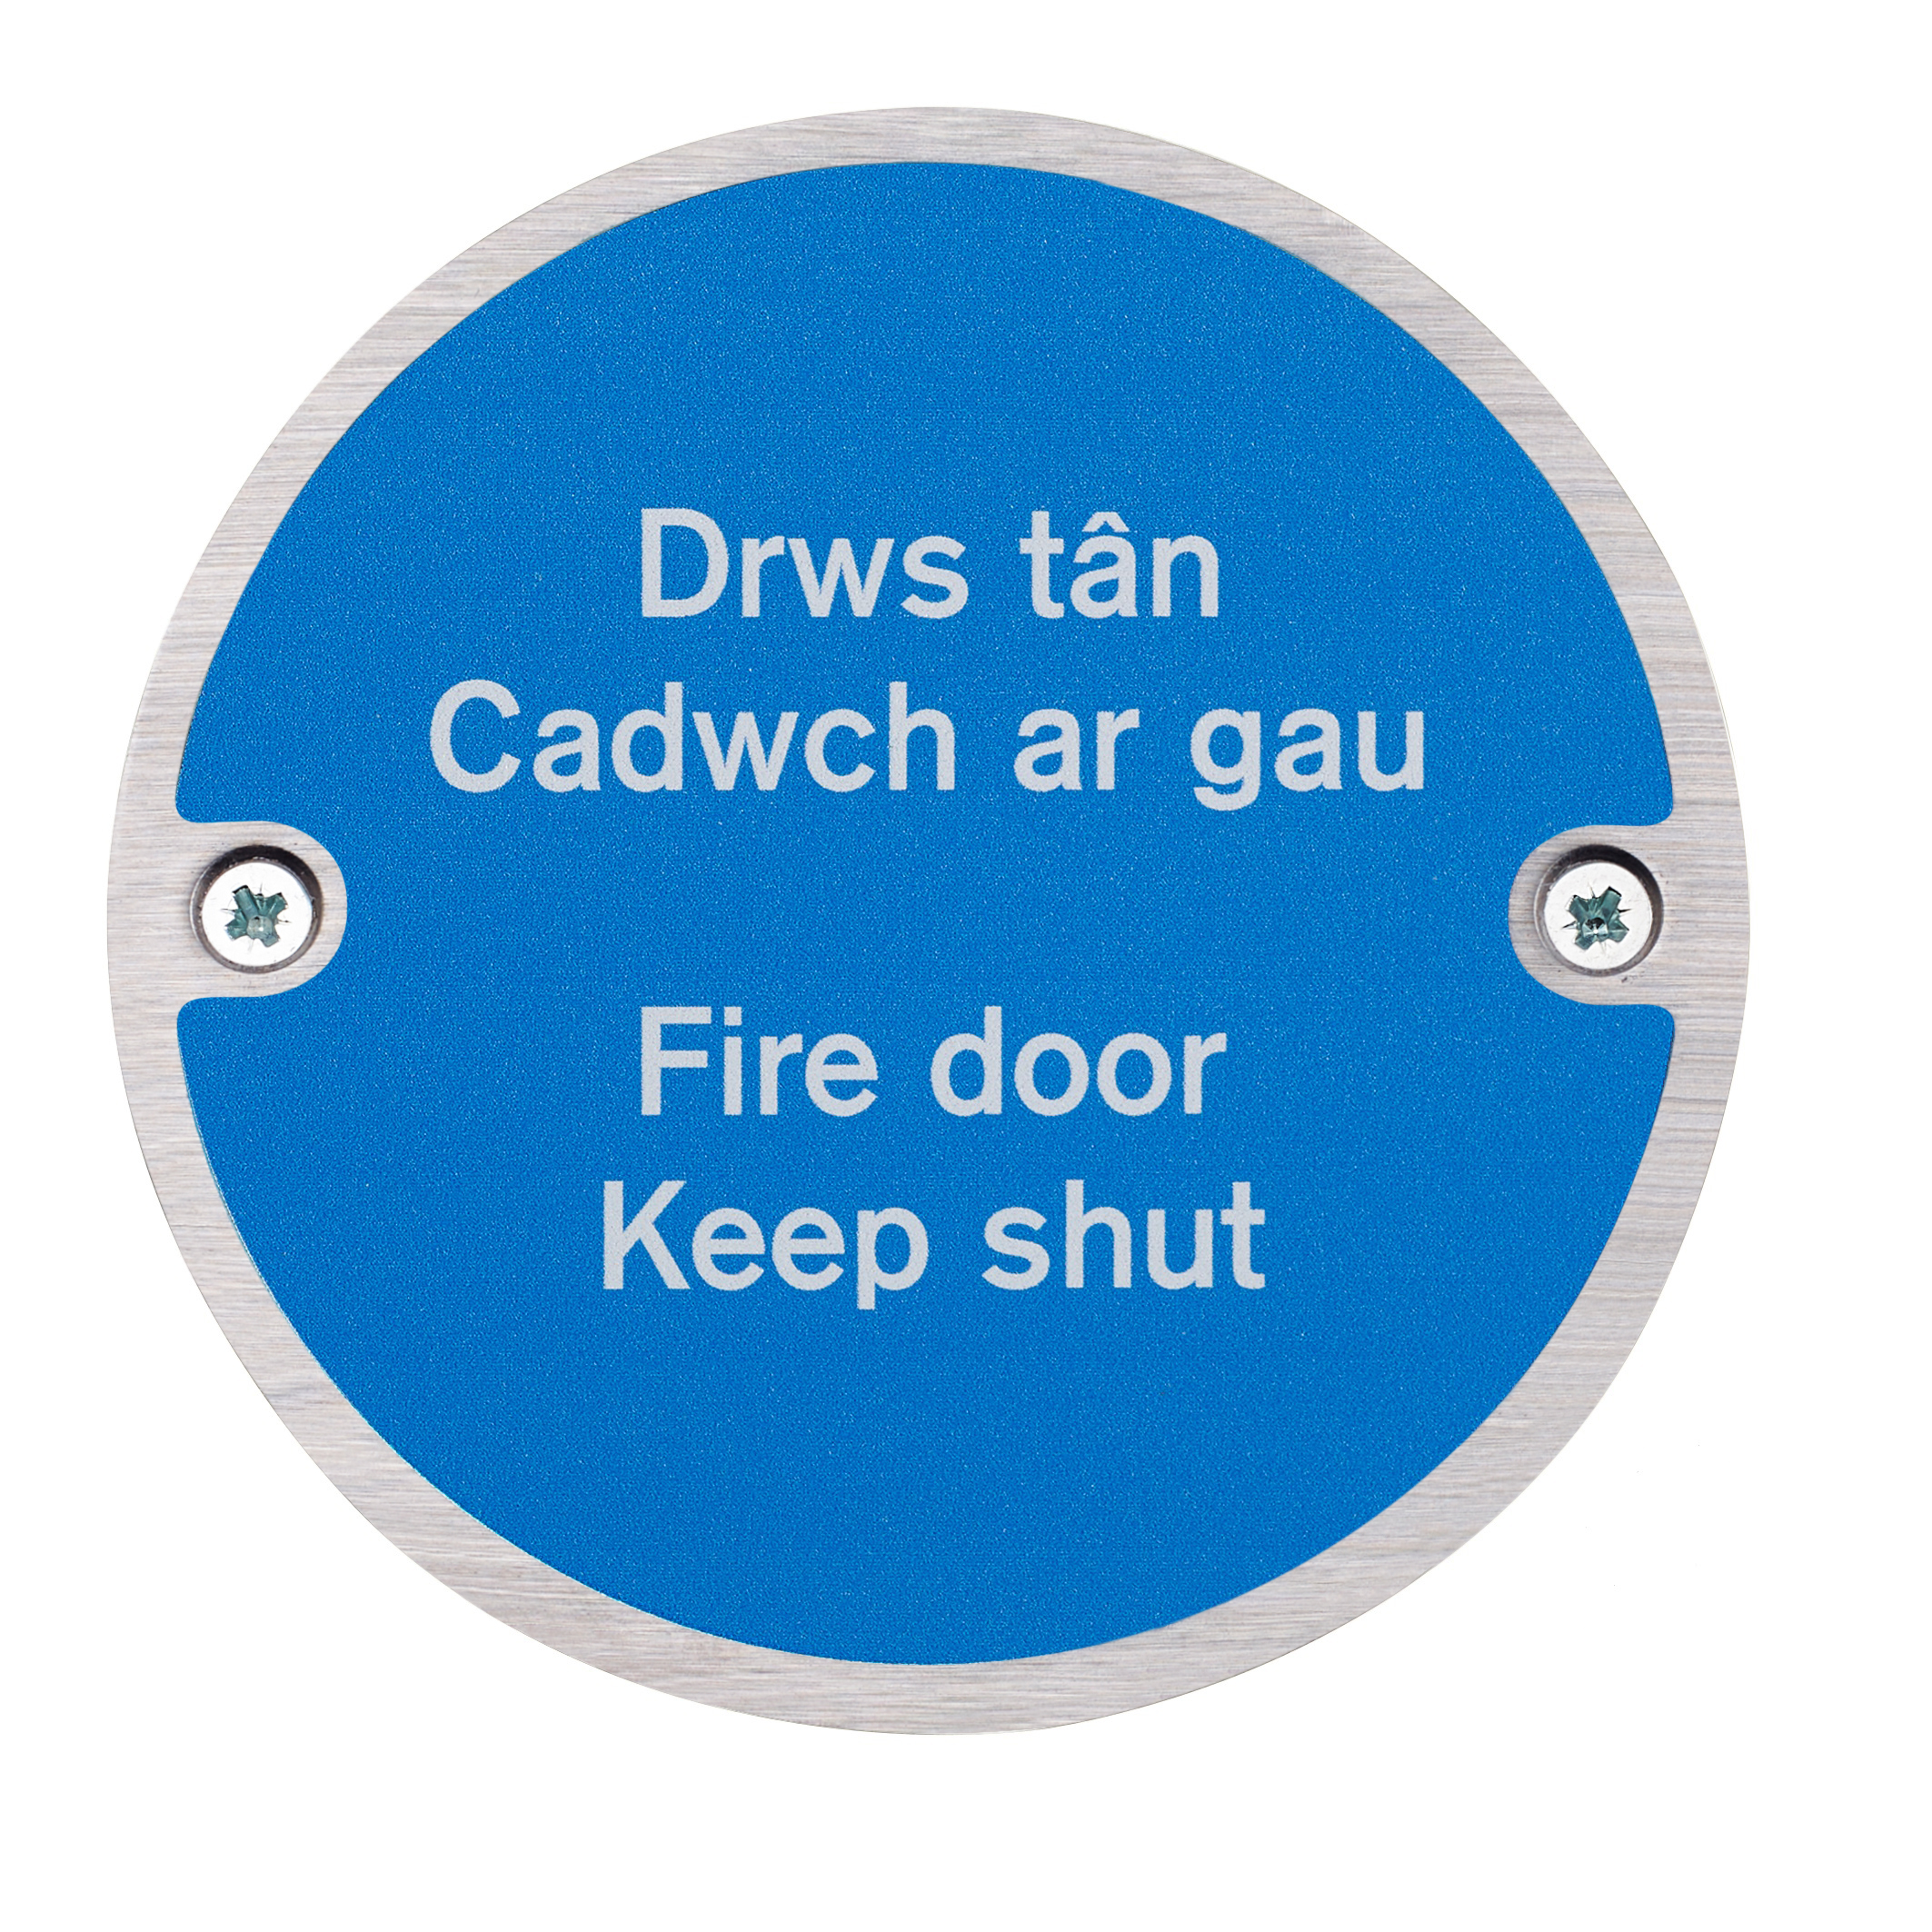 Round Stainless Steel Metal FDKS Fire Door Keep Shut Safety Sign Disc 